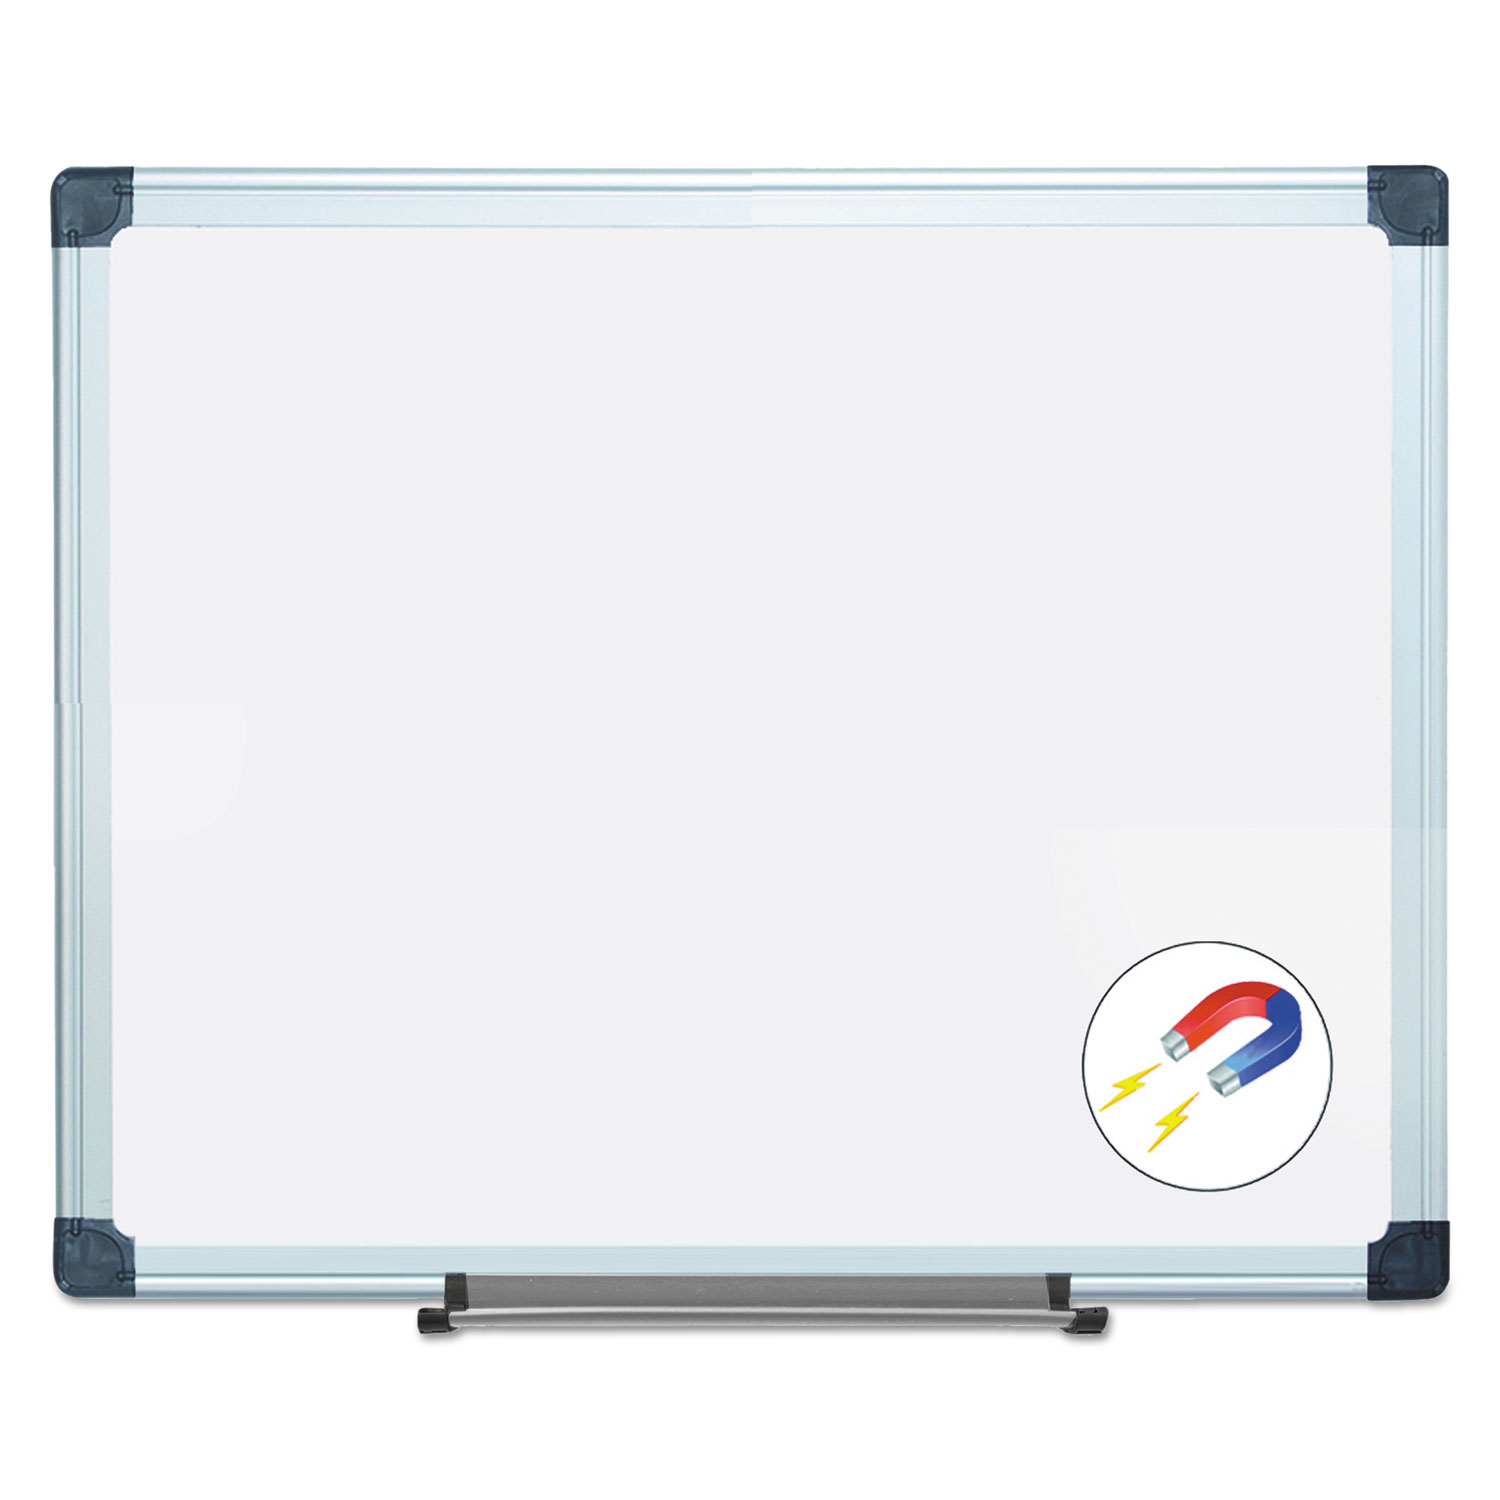 Value Lacquered Steel Magnetic Dry Erase Board, 24 x 36, White Surface, Silver Aluminum Frame